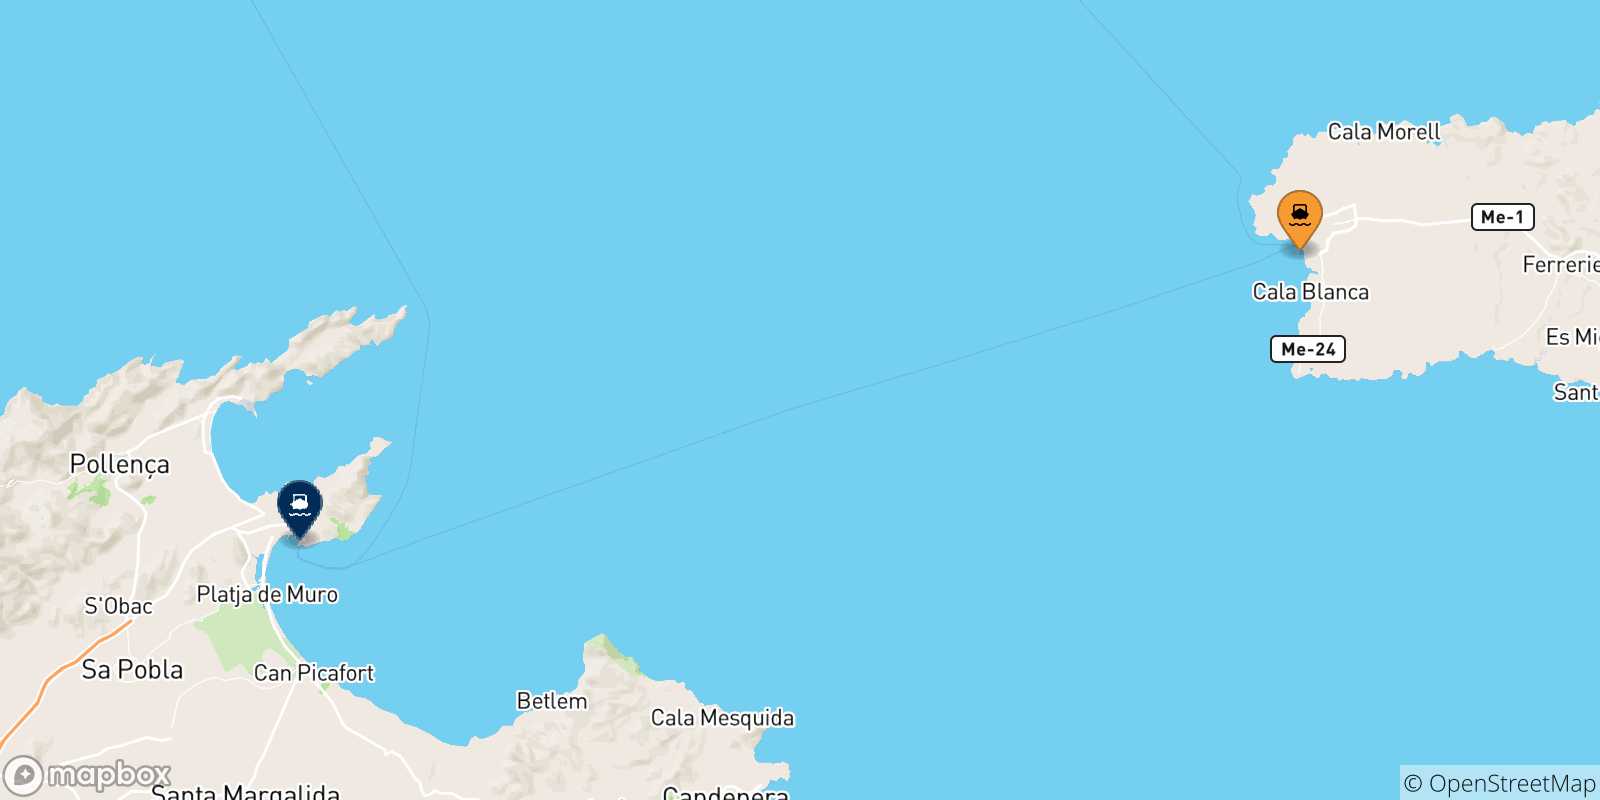 Map of the possible routes between Ciutadella (Minorca) and Balearic Islands